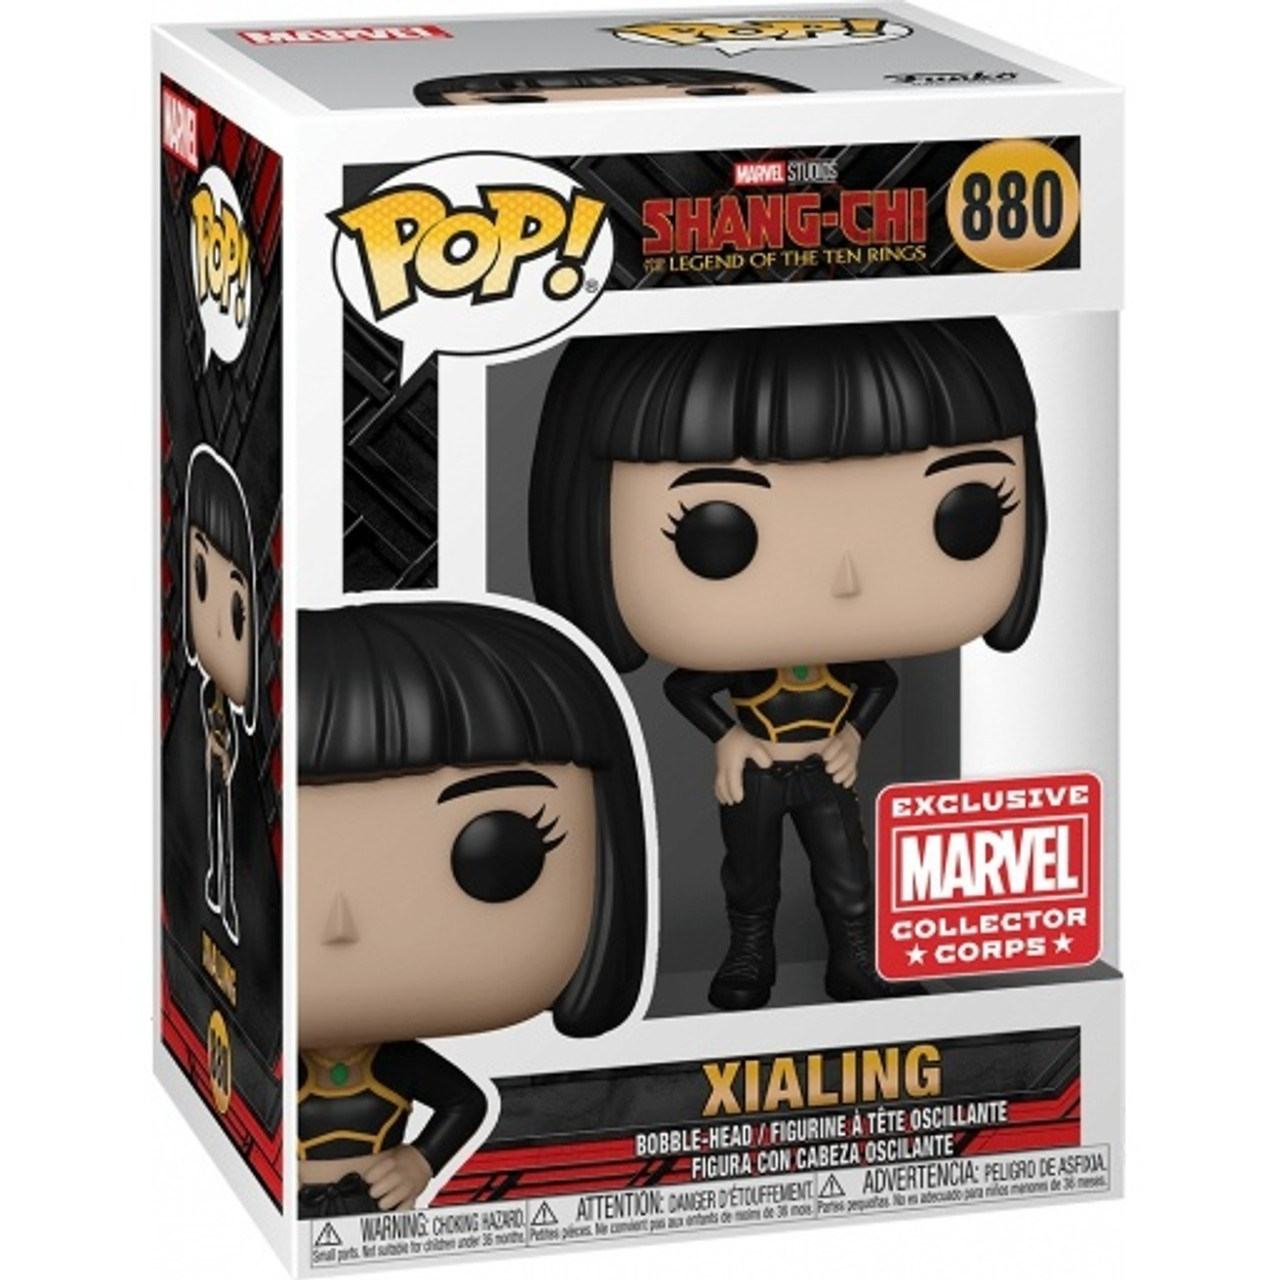 Pop! Marvel Collector Corps Exclusive Xialing #880